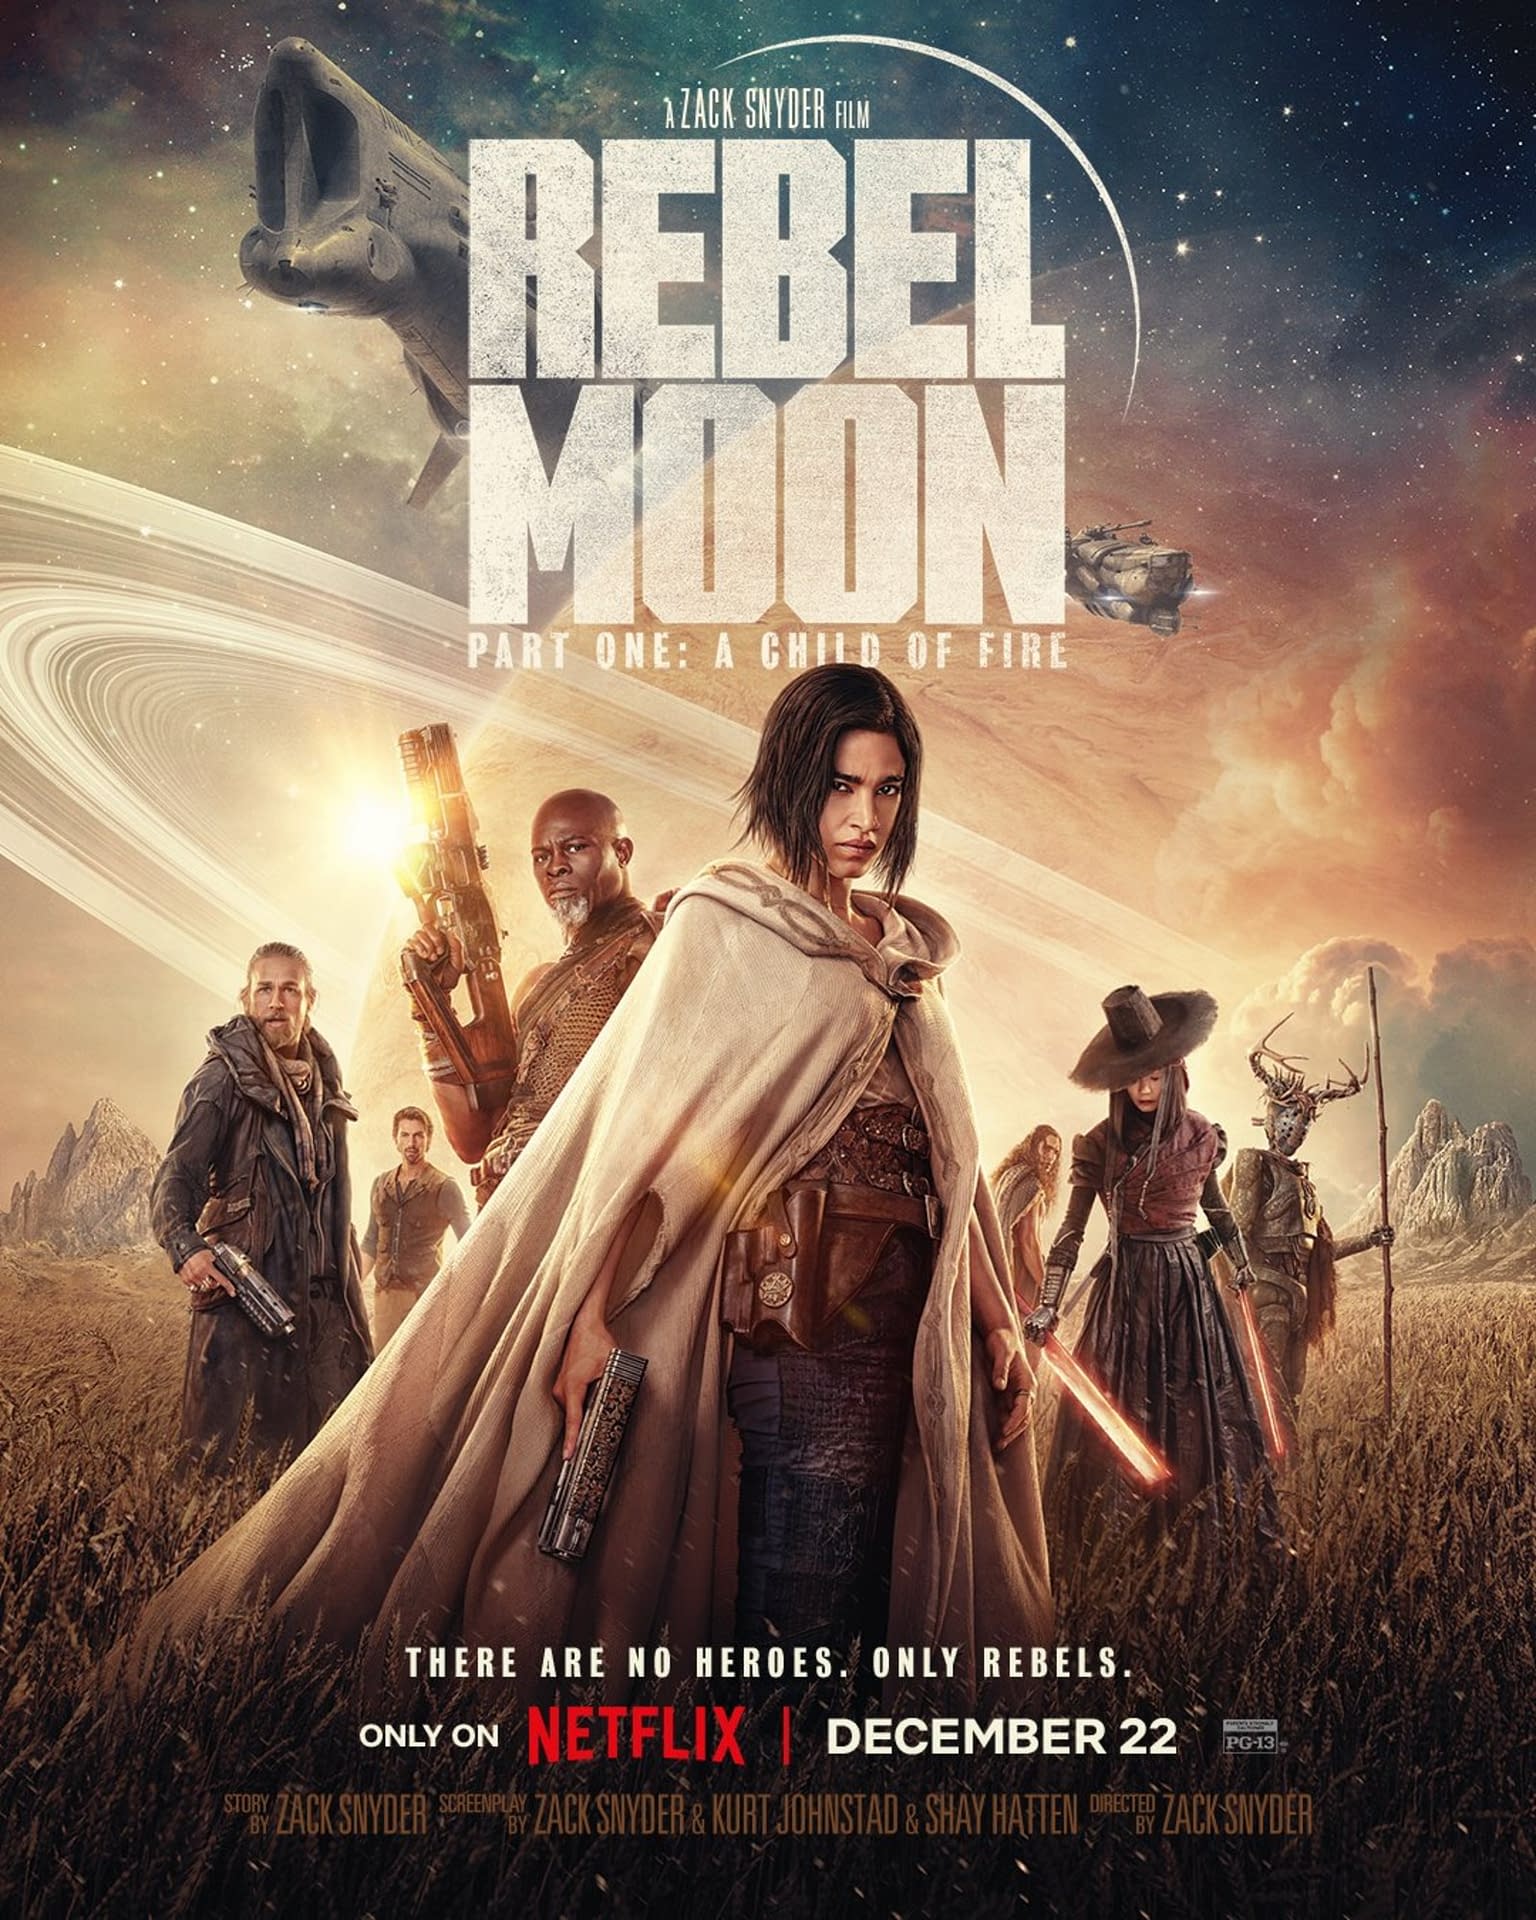 Rebel Moon teases its trailer release today with new shots